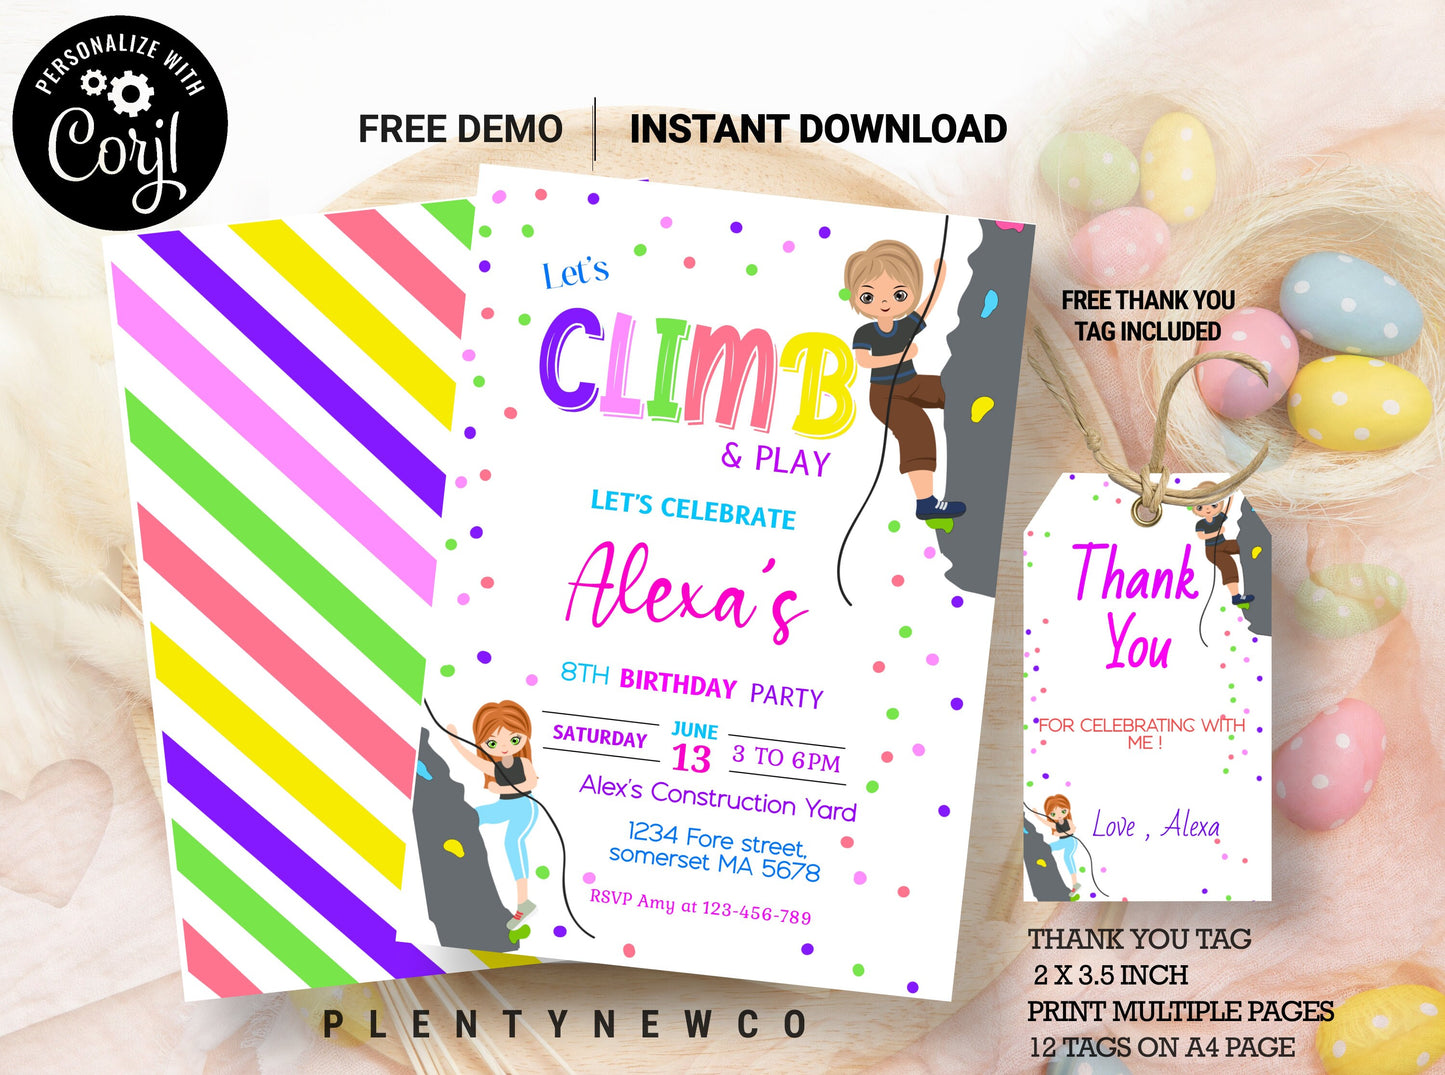 Rock Climbing Birthday Invitation, Editable Indoor Climbing Party Invite, Let's Climb and Play, Girl Adventure Party, Instant Download, PL